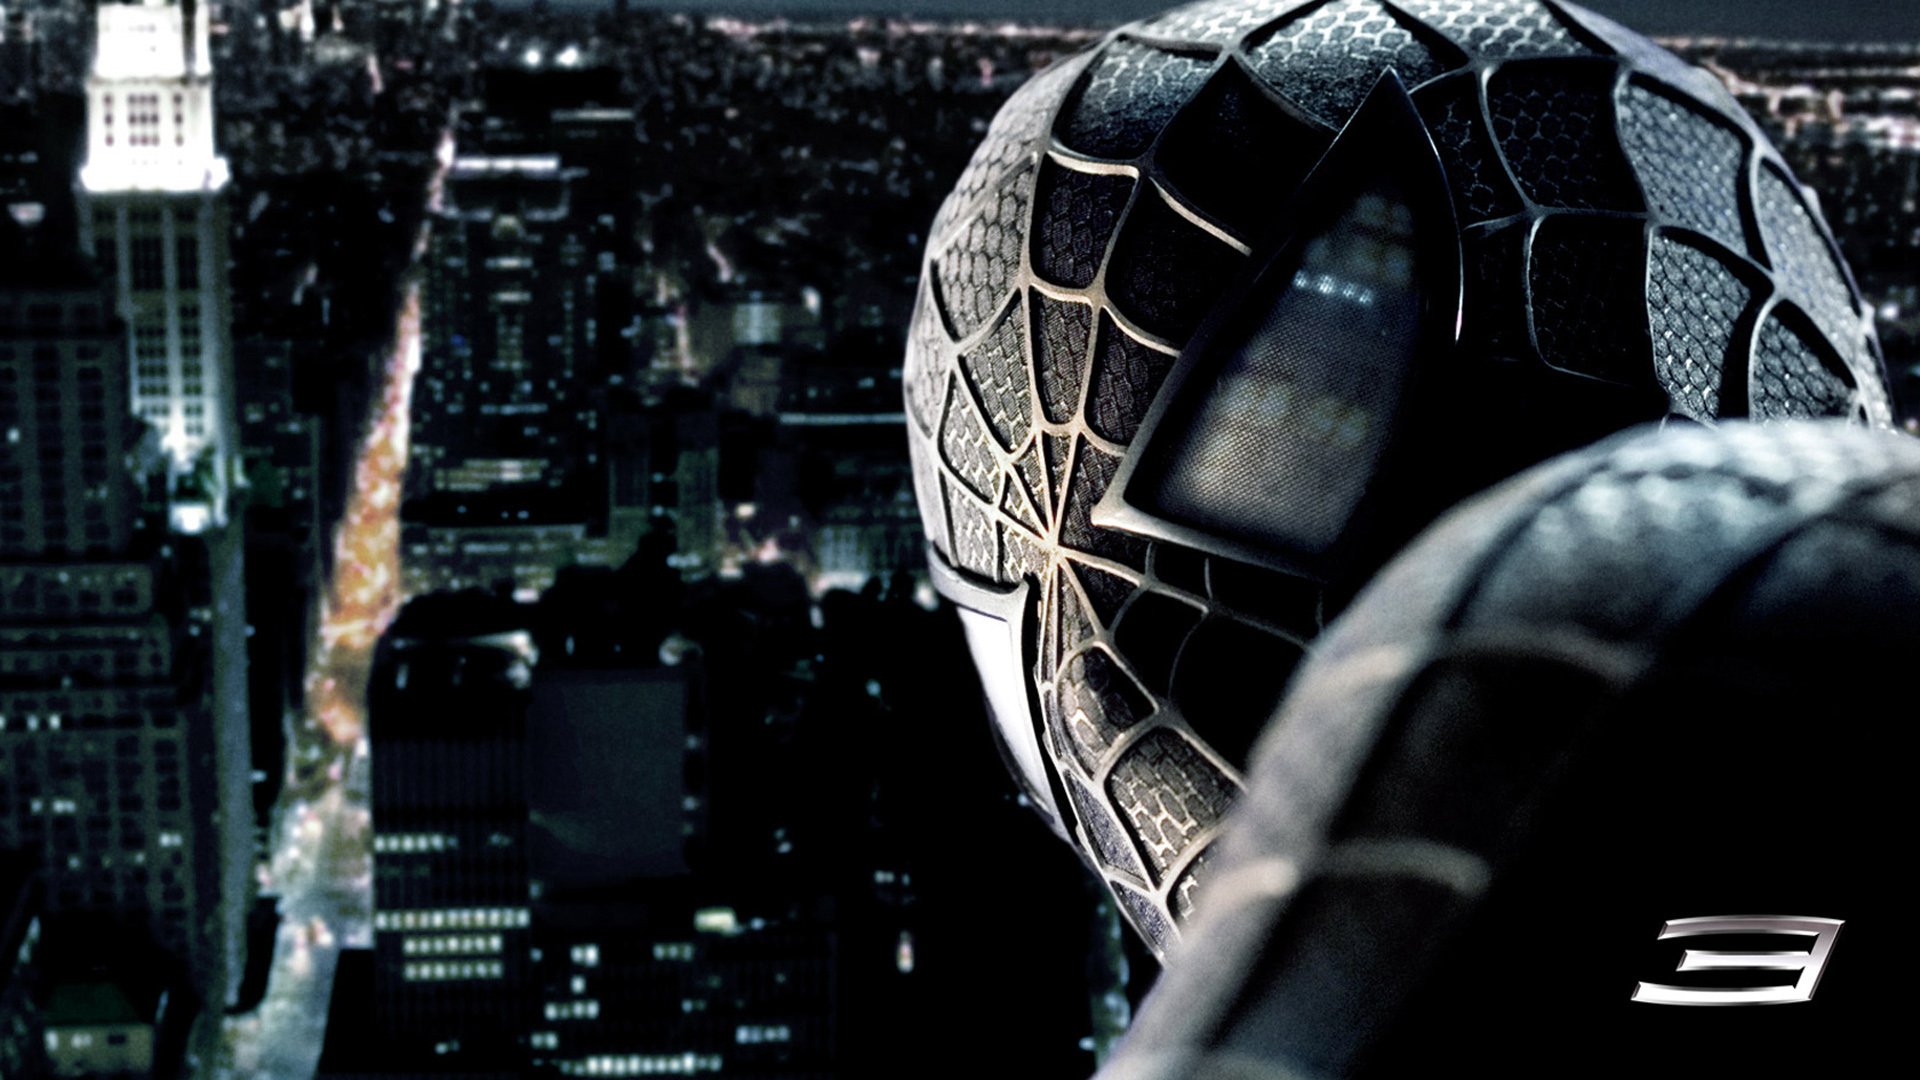 Spider-Man 3 download the new for android